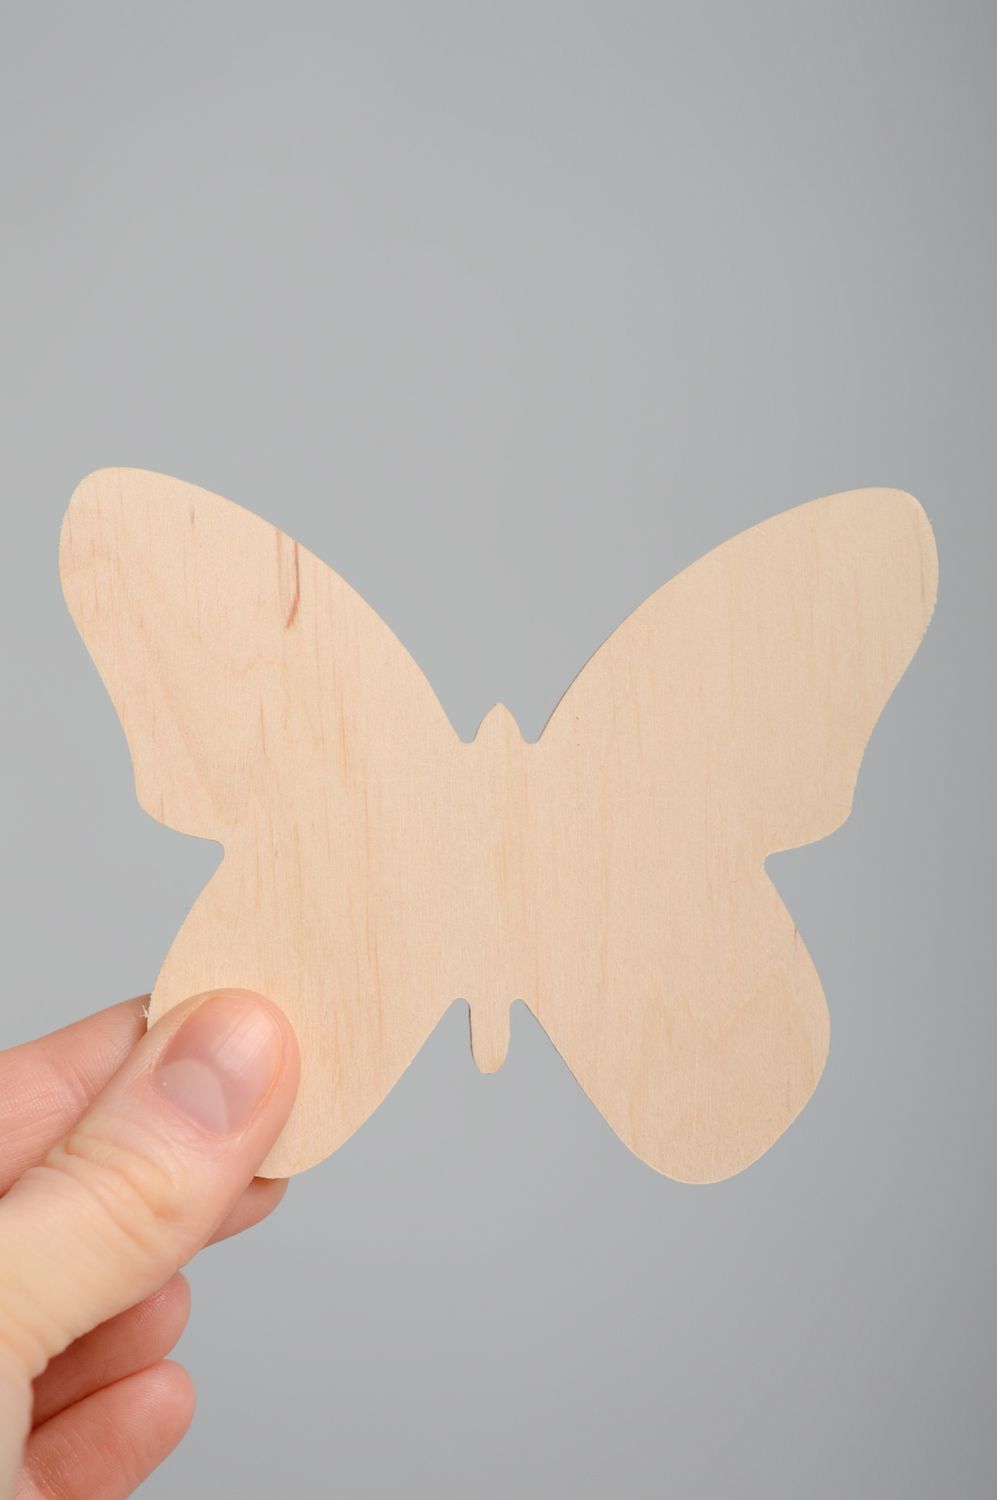 Small plywood craft blank for painting Butterfly photo 4